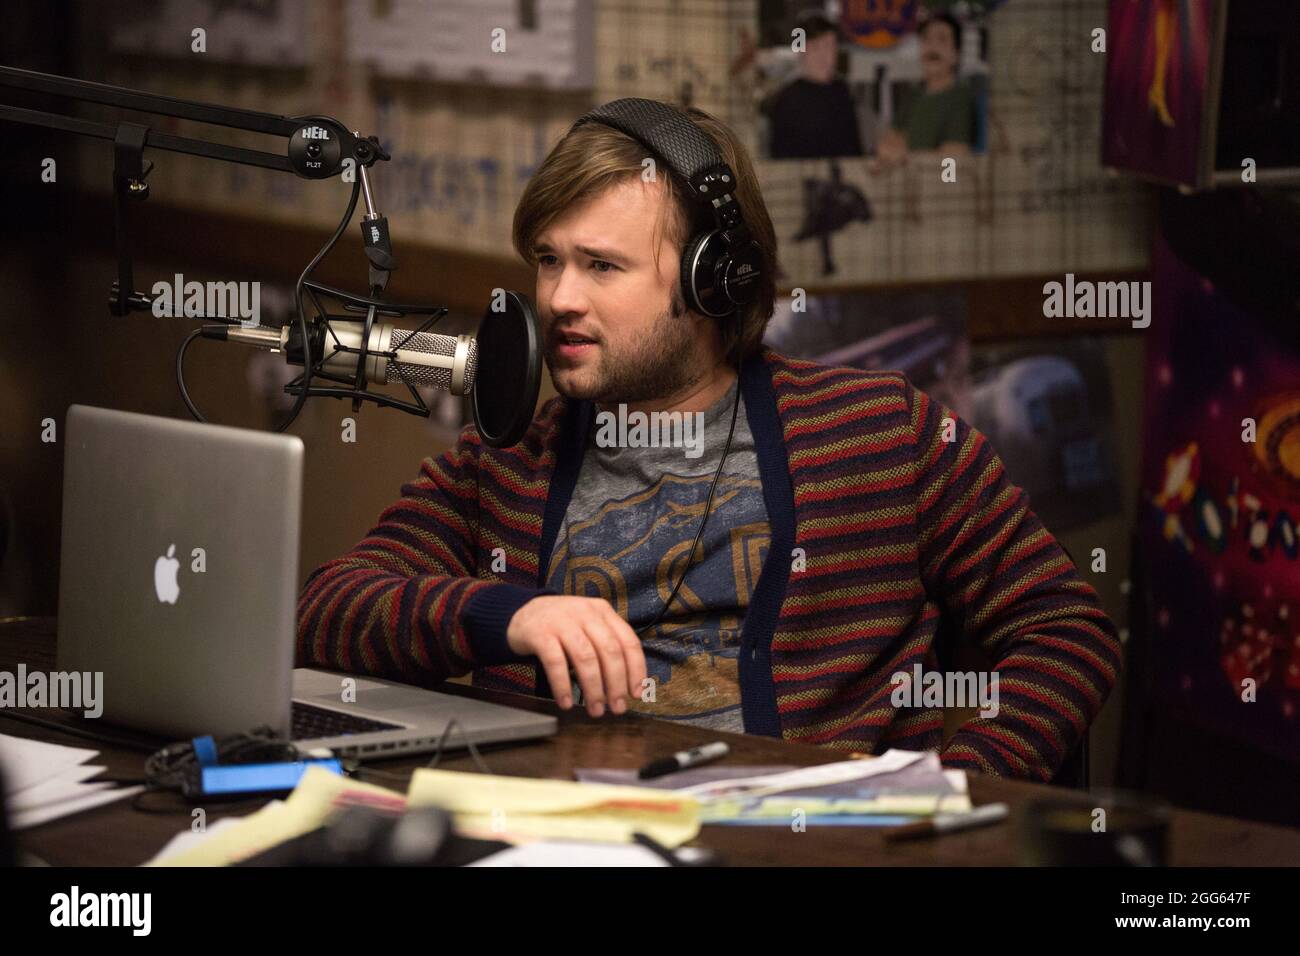 HALEY JOEL OSMENT in TUSK (2014), diretto da KEVIN SMITH. CREDIT: DEMAREST FILMS/PHASE 4 FILMS/SMODCAST PICTURES/XYZ / ALBUM Foto Stock